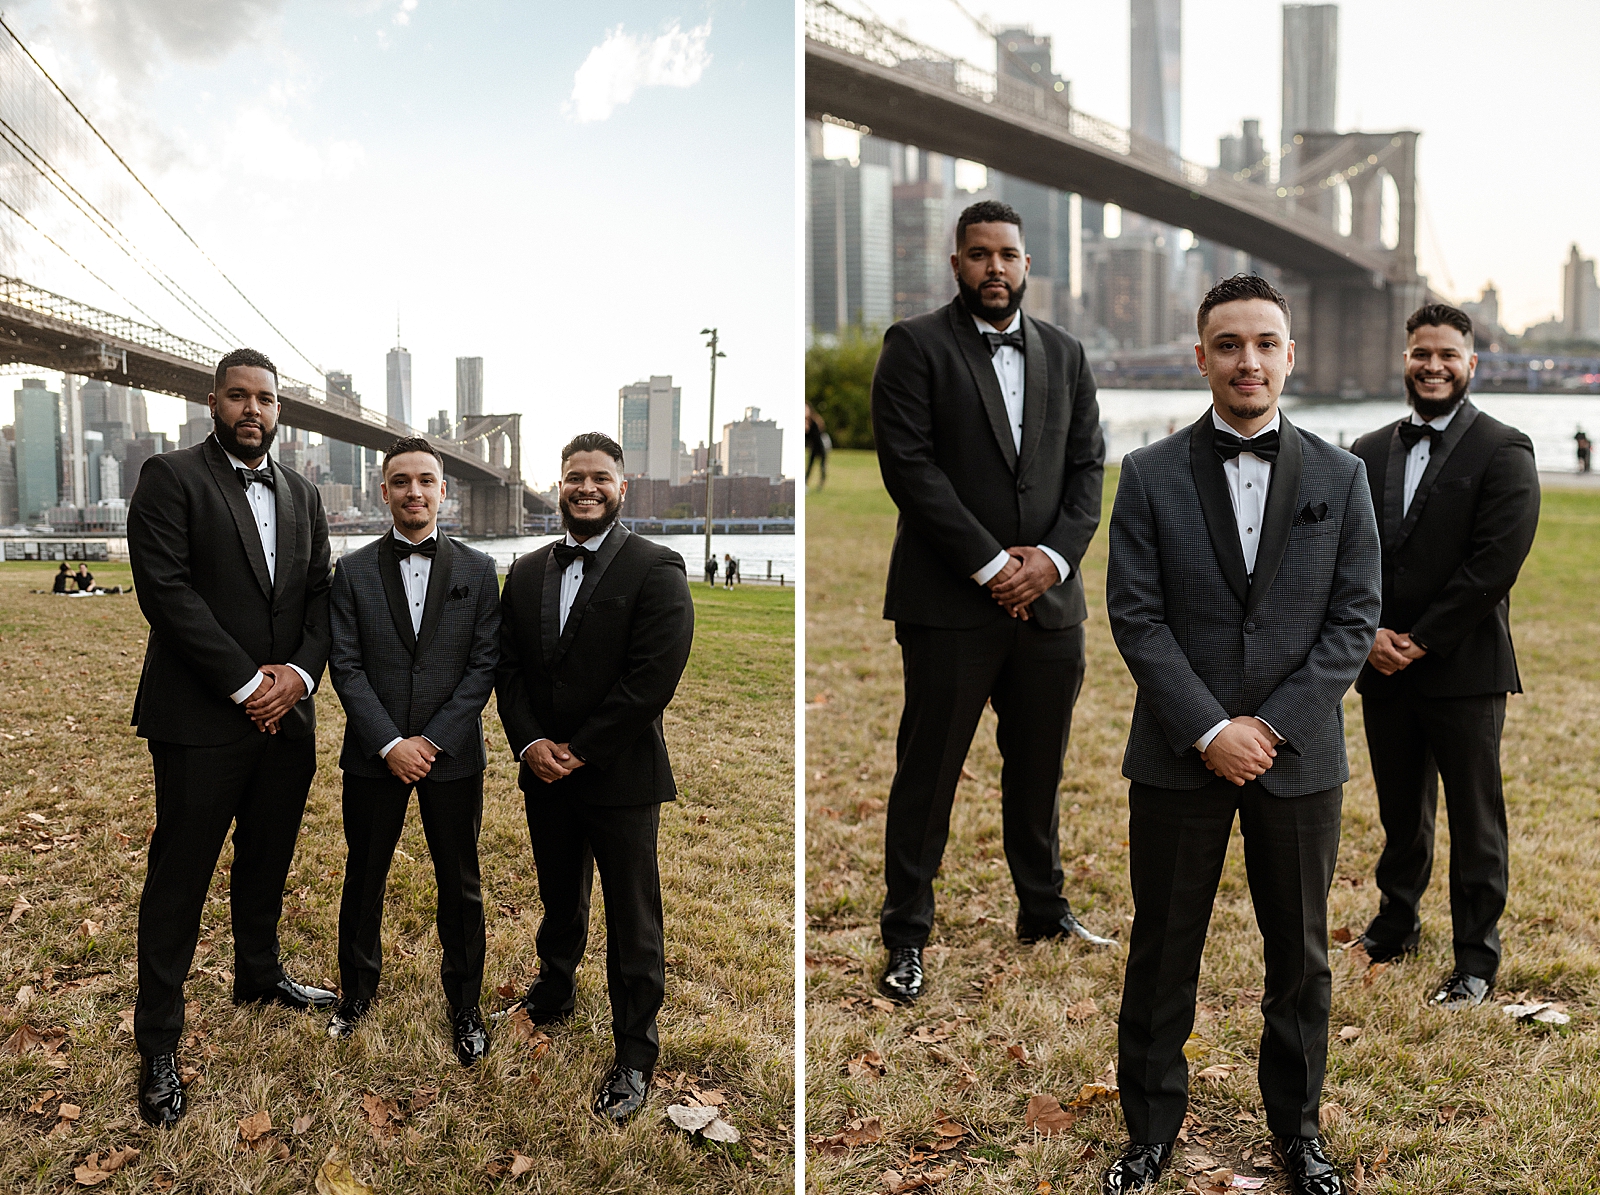 Groom with groomsmen in formal formation outside